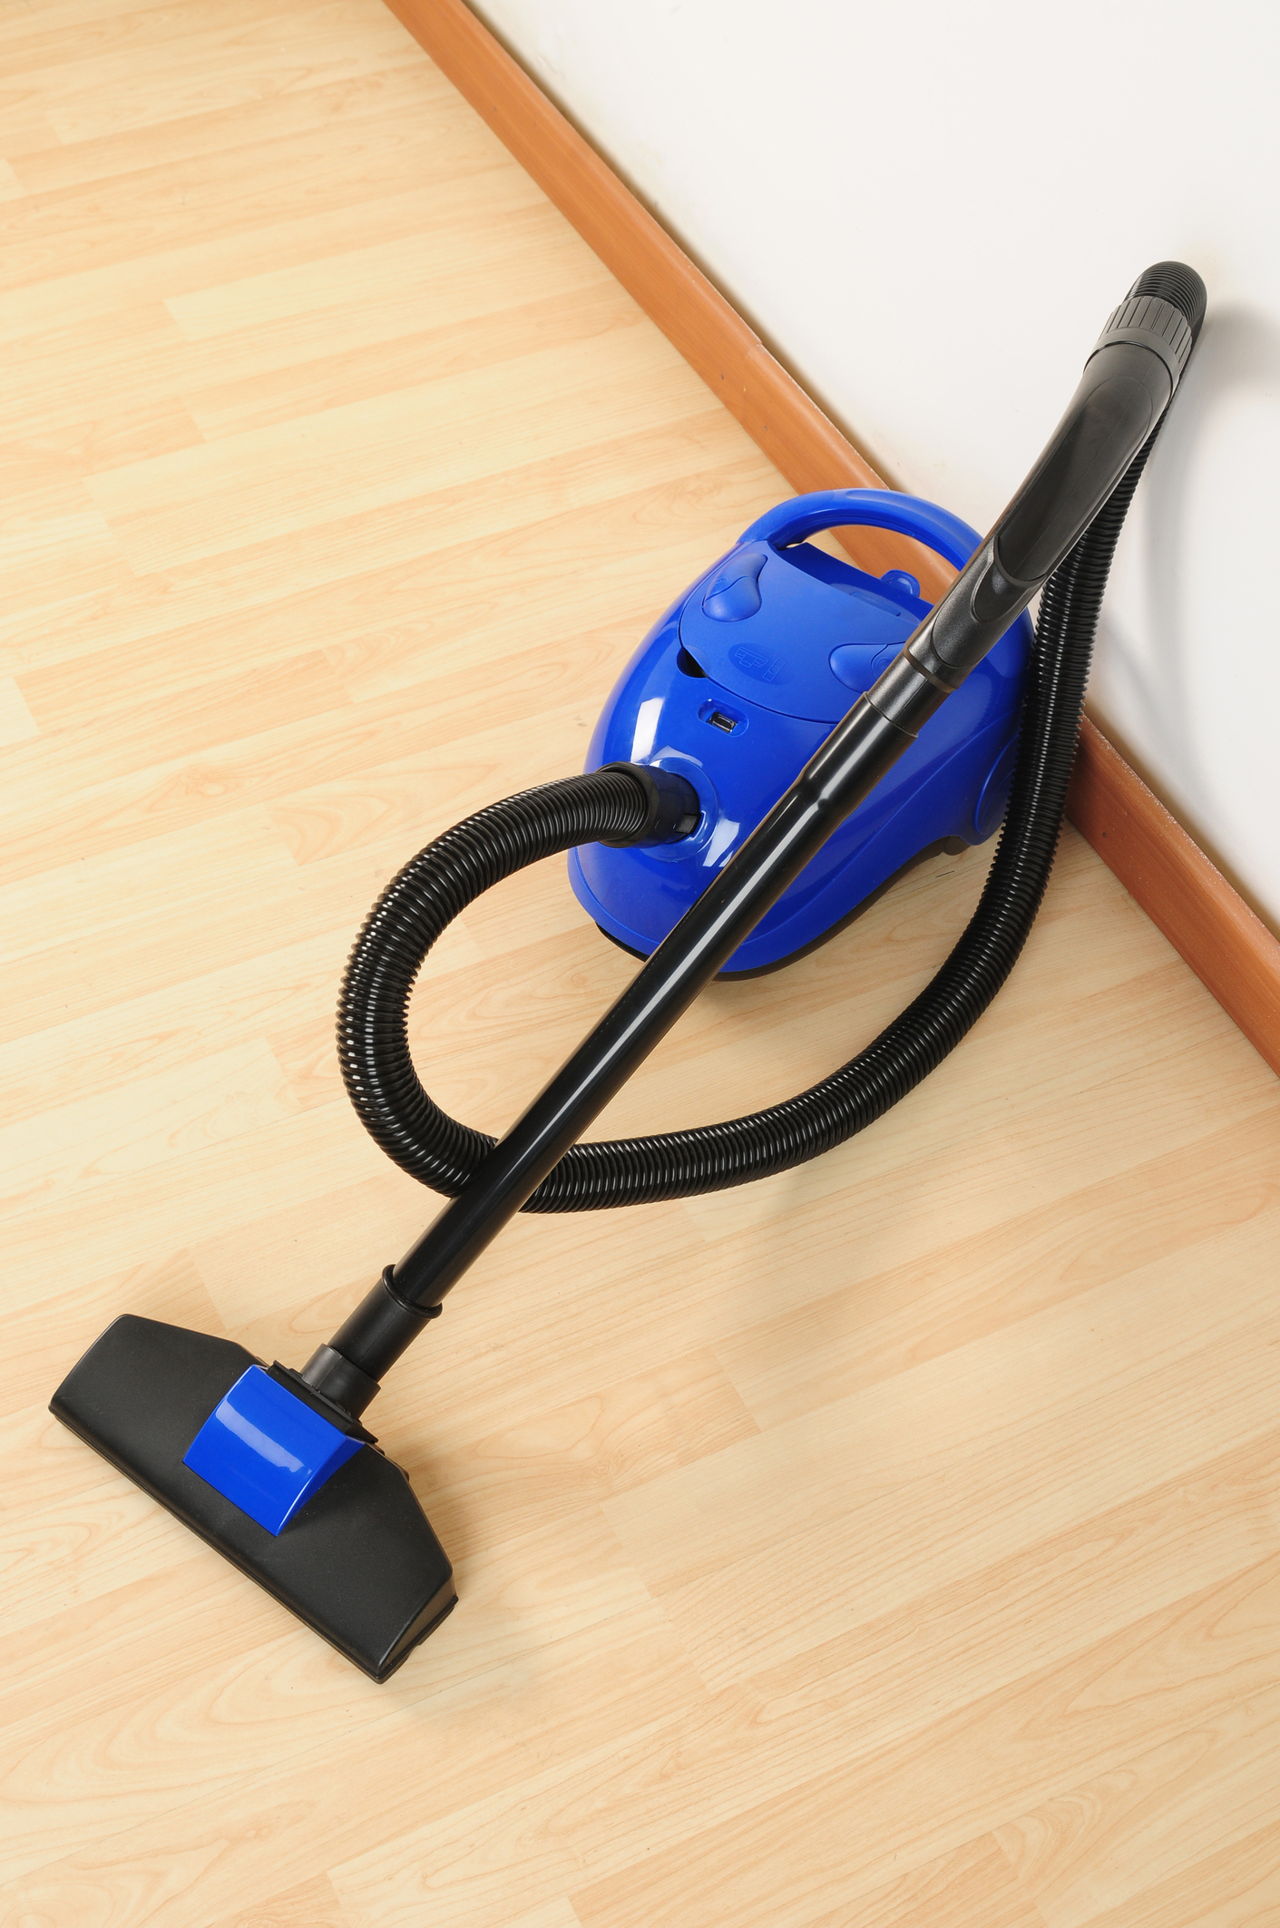 We Ll Tell You How To Clean Laminate, Mop Laminate Floors Without Streaking